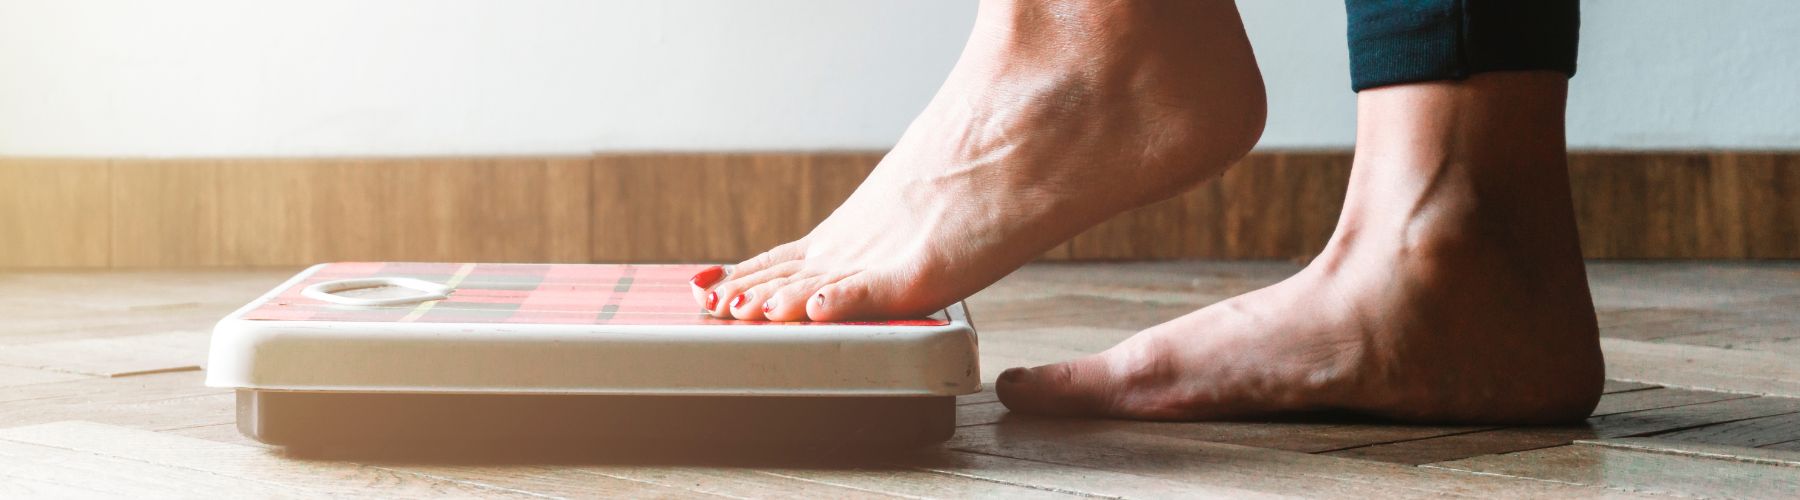 A person stepping onto a weighing scale, an example of what should a good weight management program include.